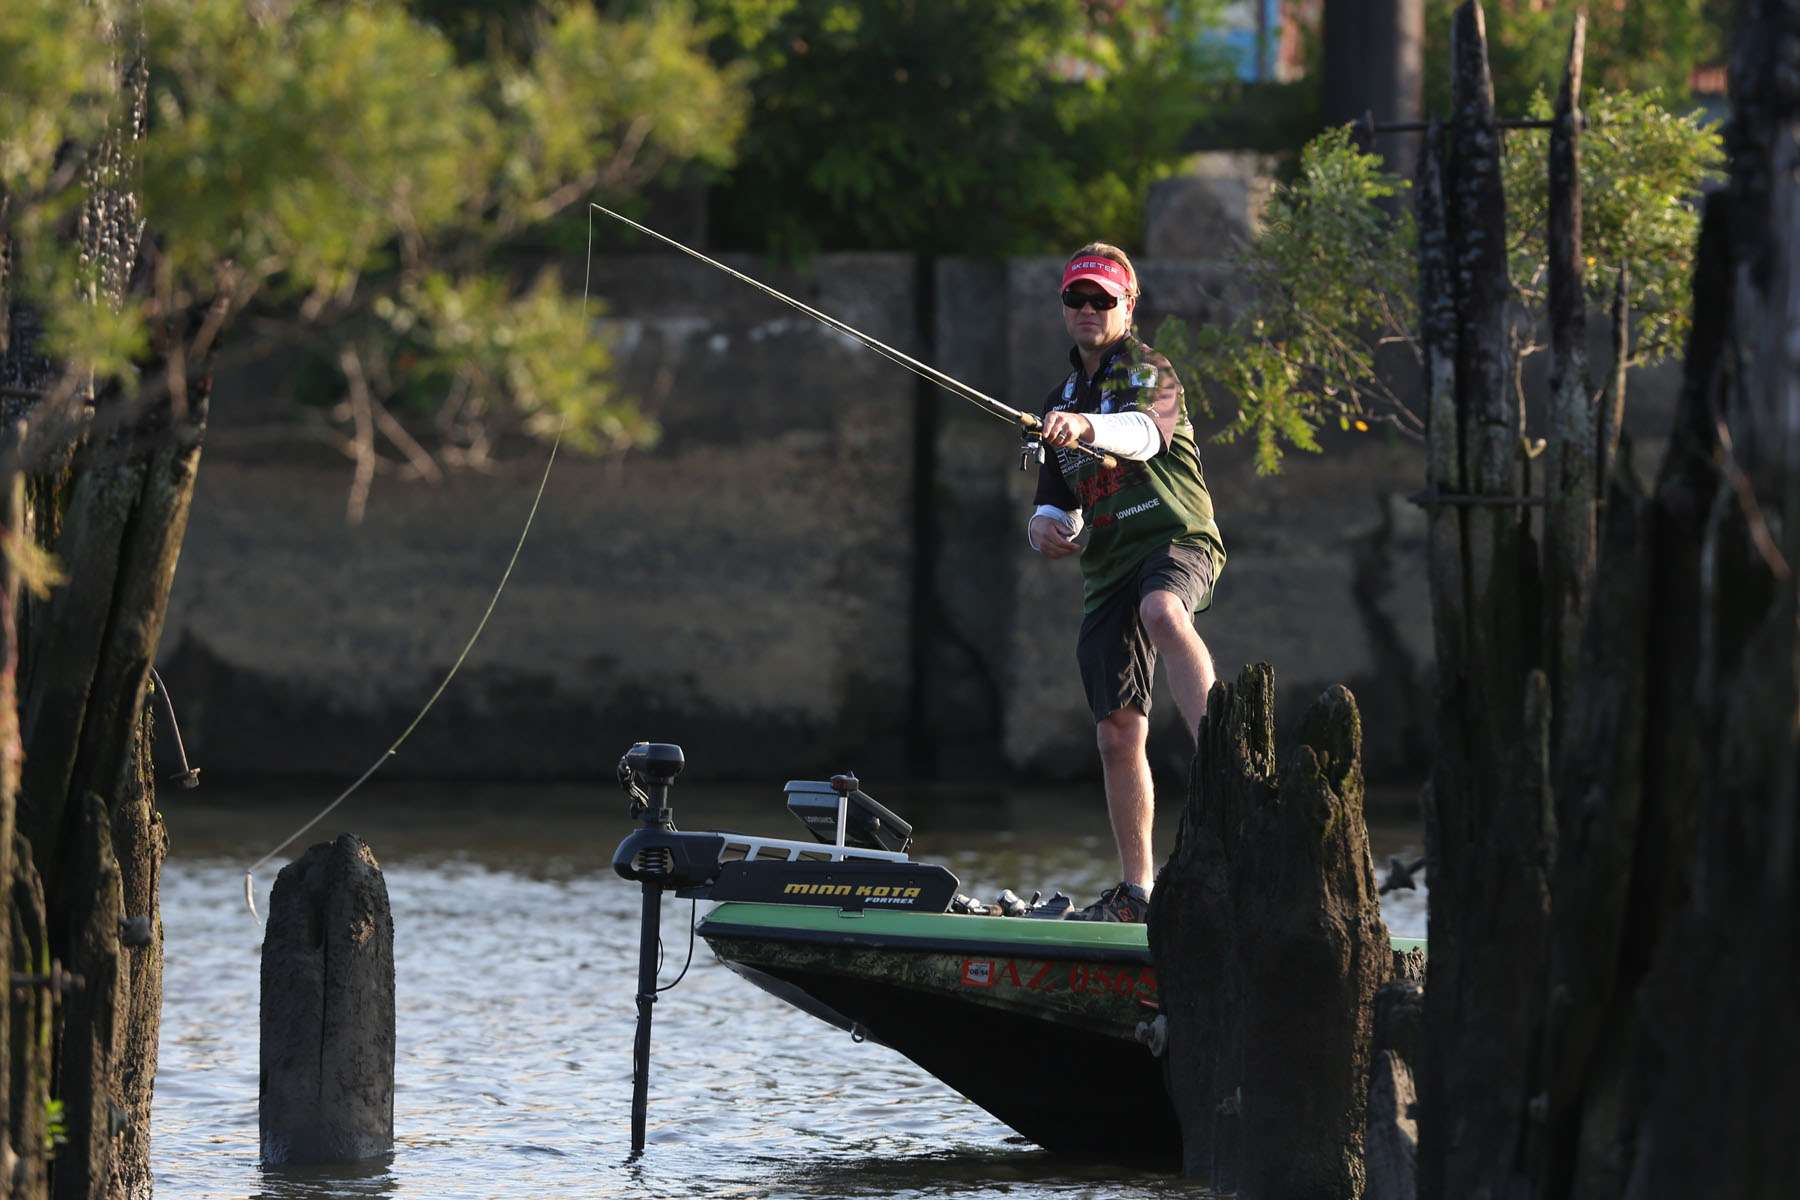 Cliff Pirch wants to give this Classic thing another shot. He qualified for his first last year but finished 51st. To make back-to-back appearances, he knows he canât slip up at Escanaba, Mich., and the Toyota Bassmaster Angler of the Year Championship.